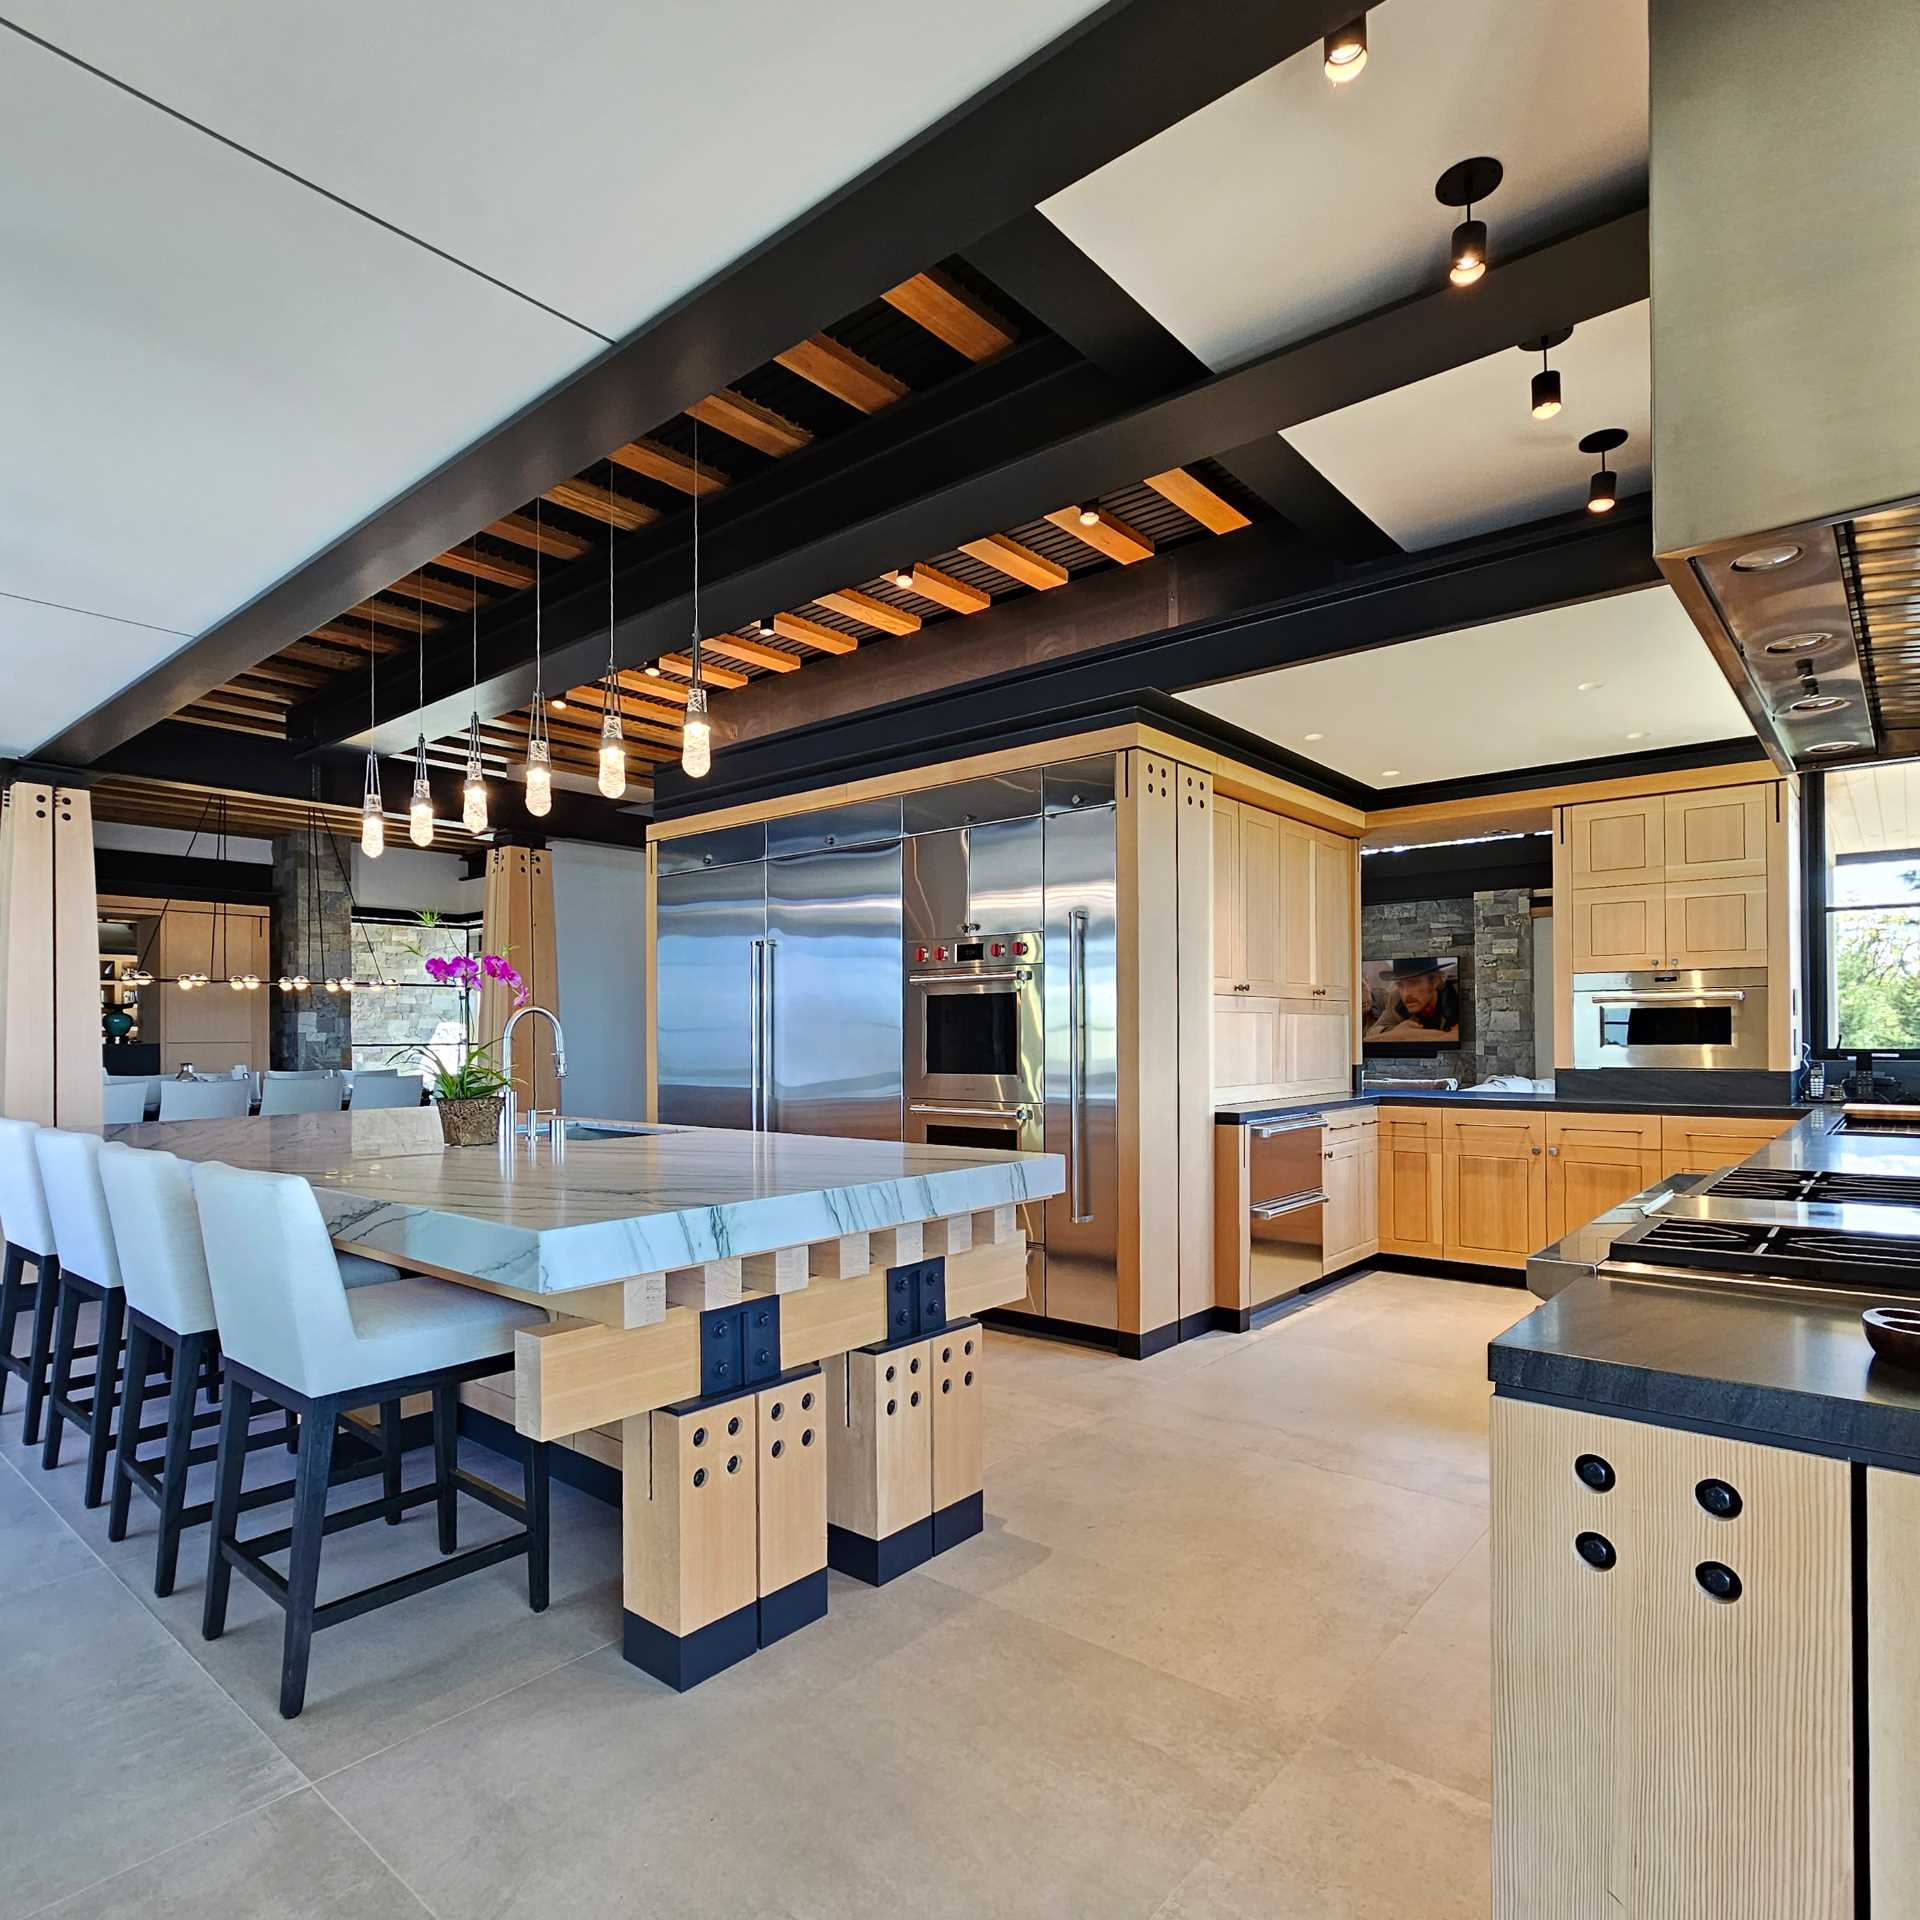 The focal point of this kitchen is the wood trestle center island that combines functionality with neo-rustic charm. Its robust presence serves as both a culinary work،e and a social hub. 